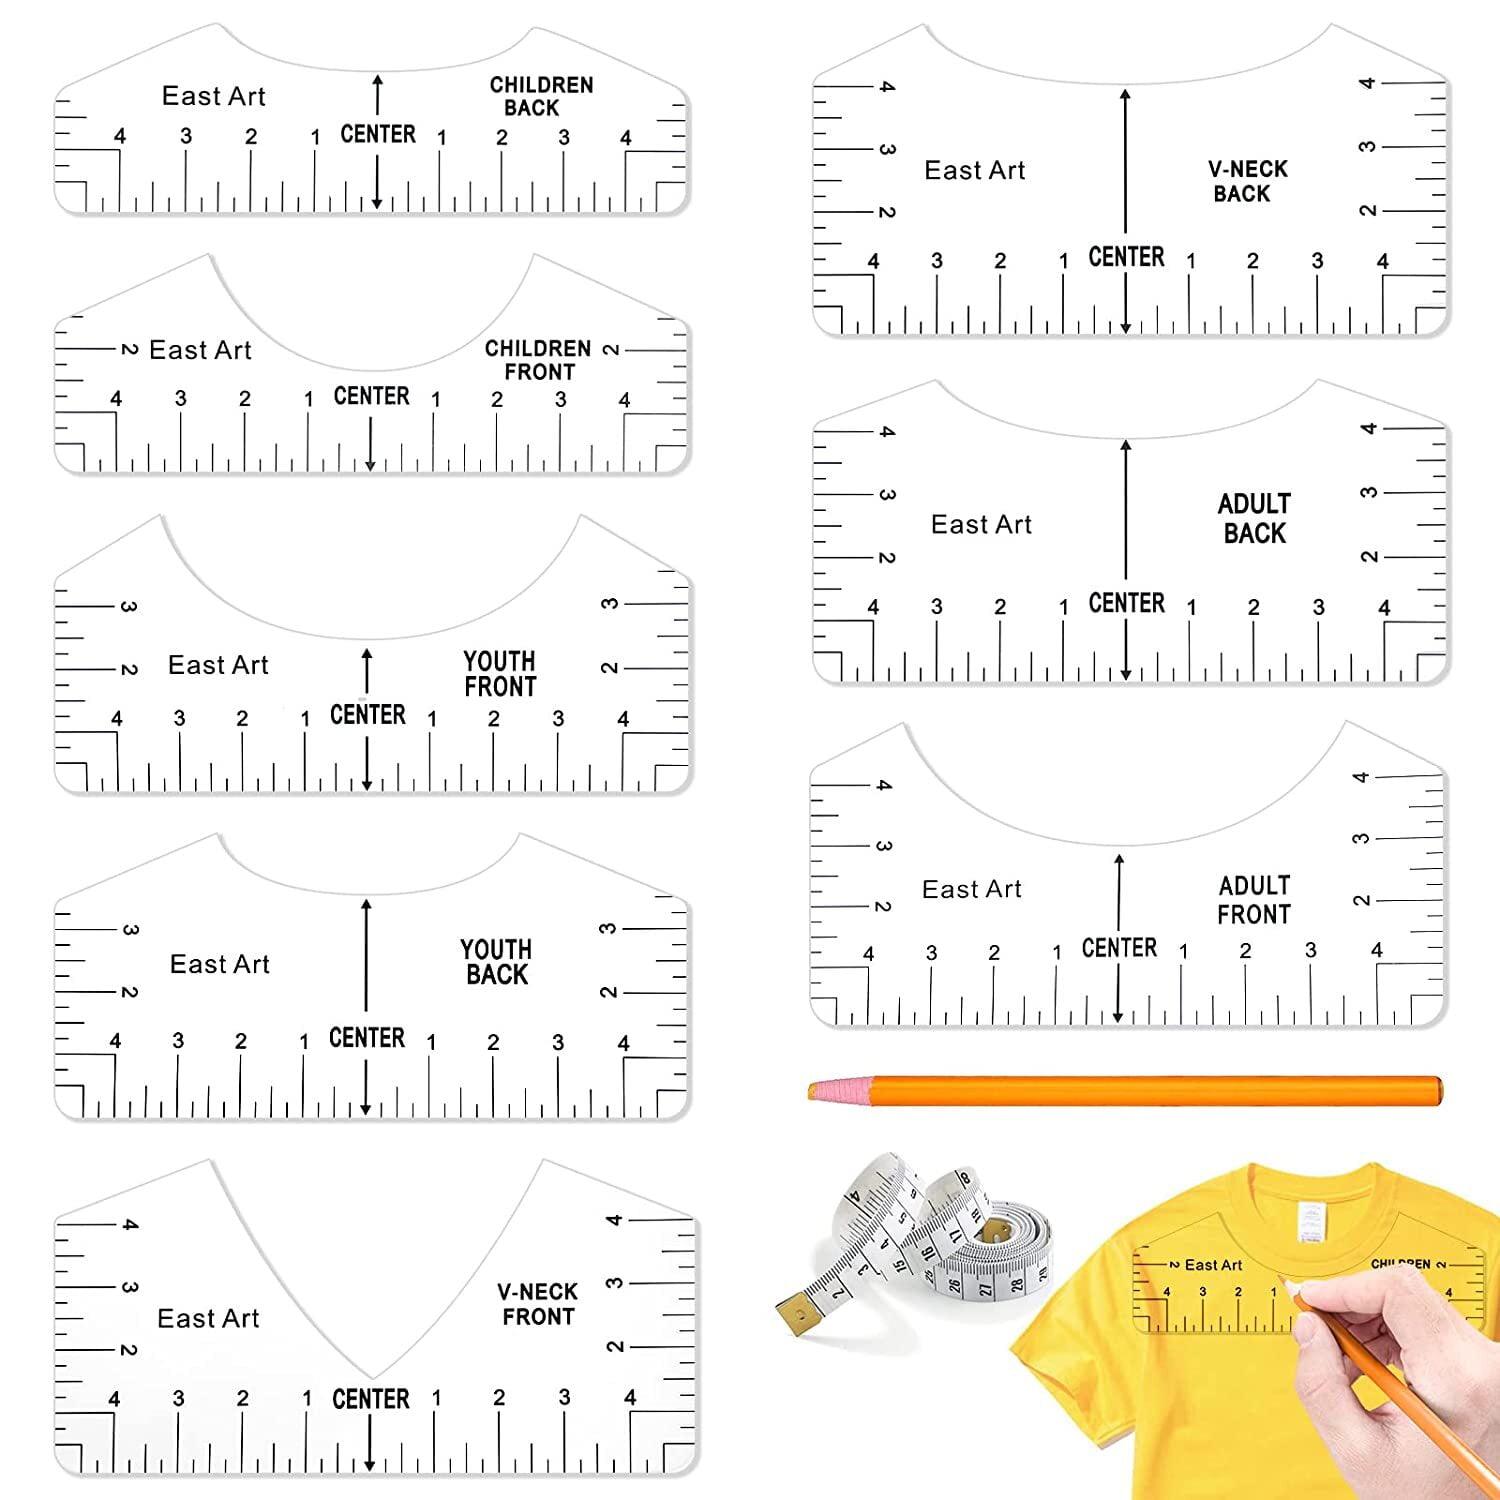 Tshirt Ruler Guide for Alignment, TShirt Rulers to Center Designs,  Alignment Tool with Soft Tape Measure,Pencil